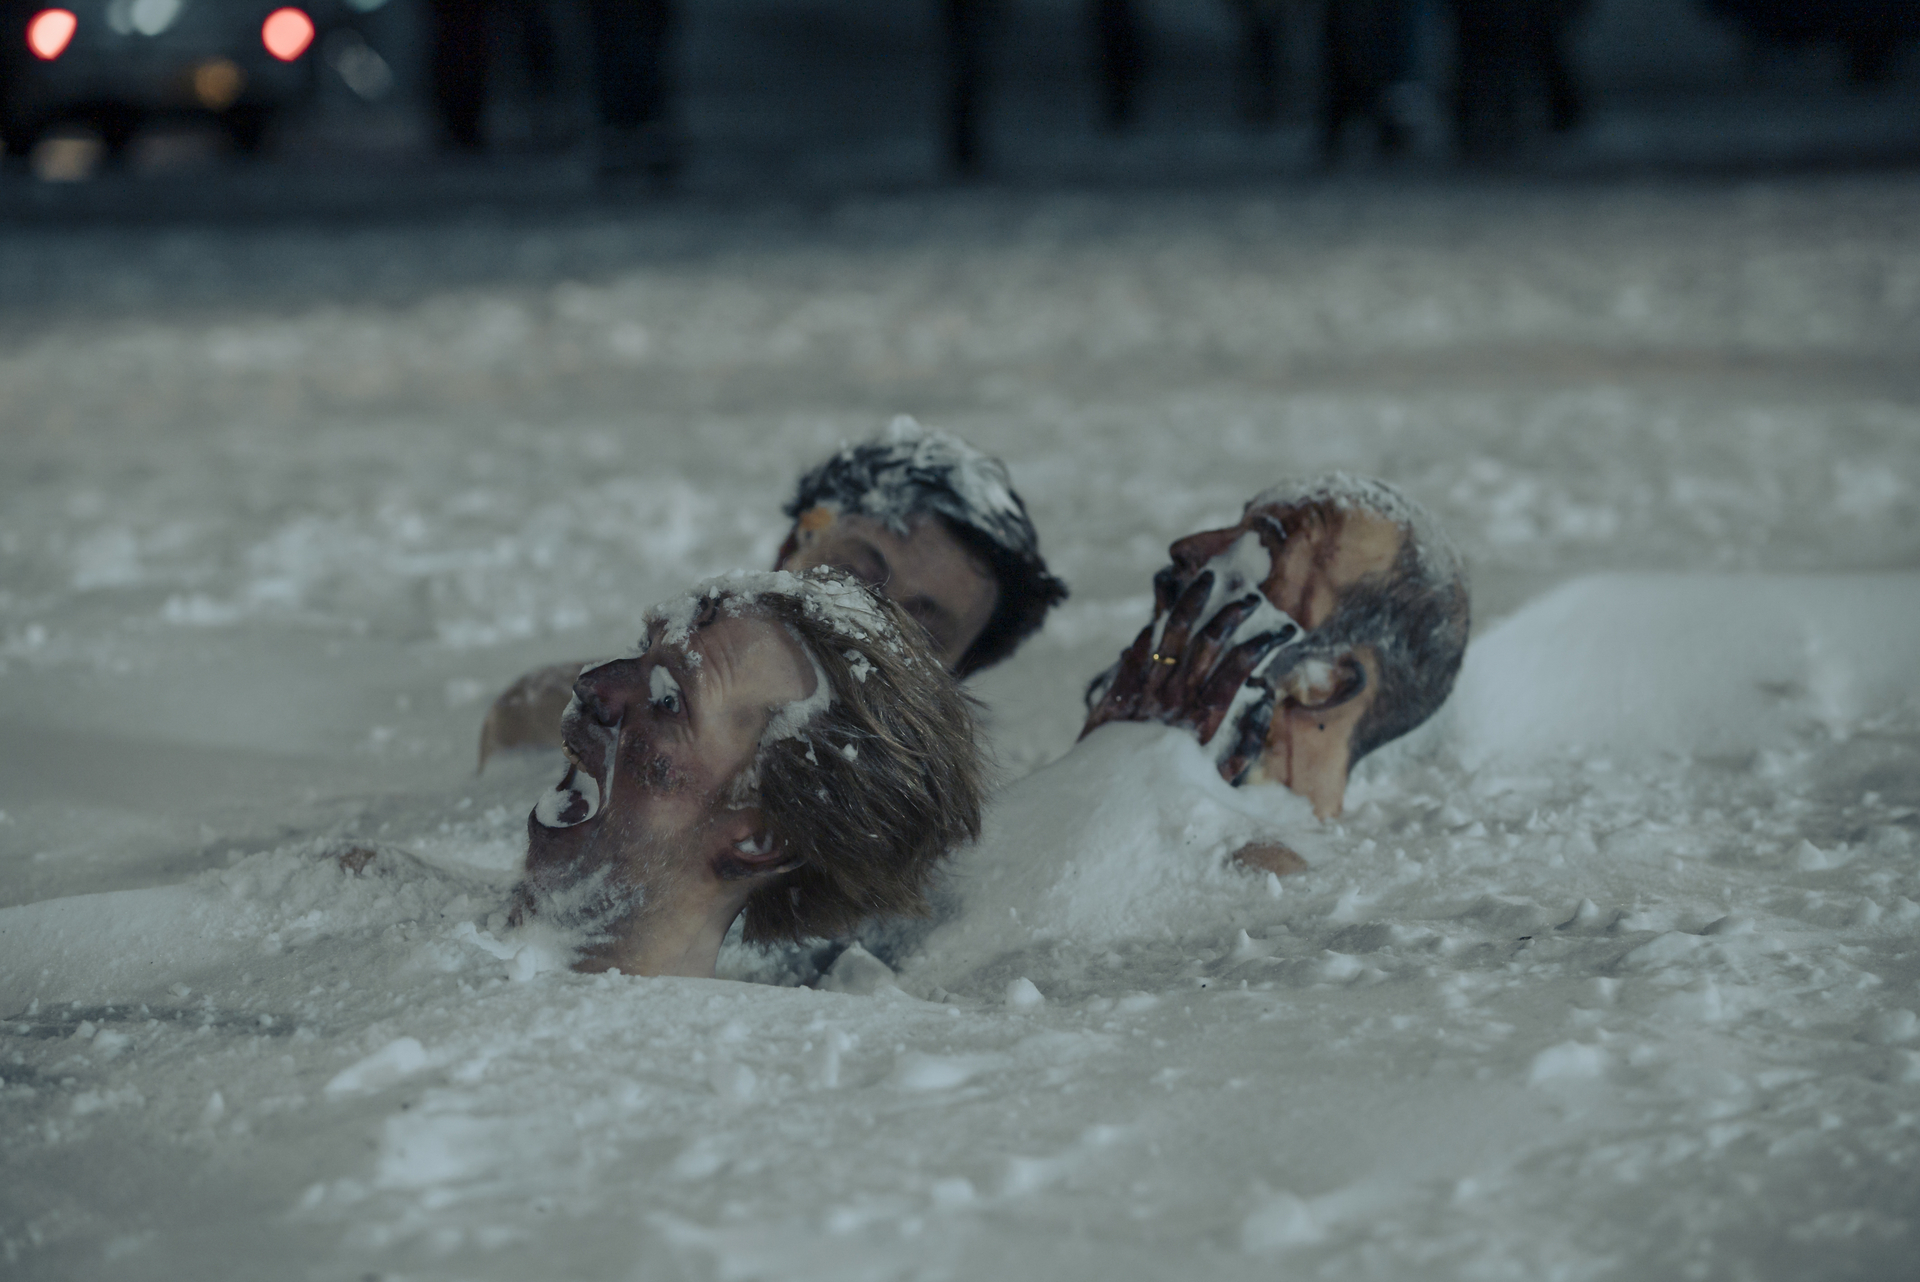 Tsalal scientists frozen in the ice in 'True Detective: Night Country'